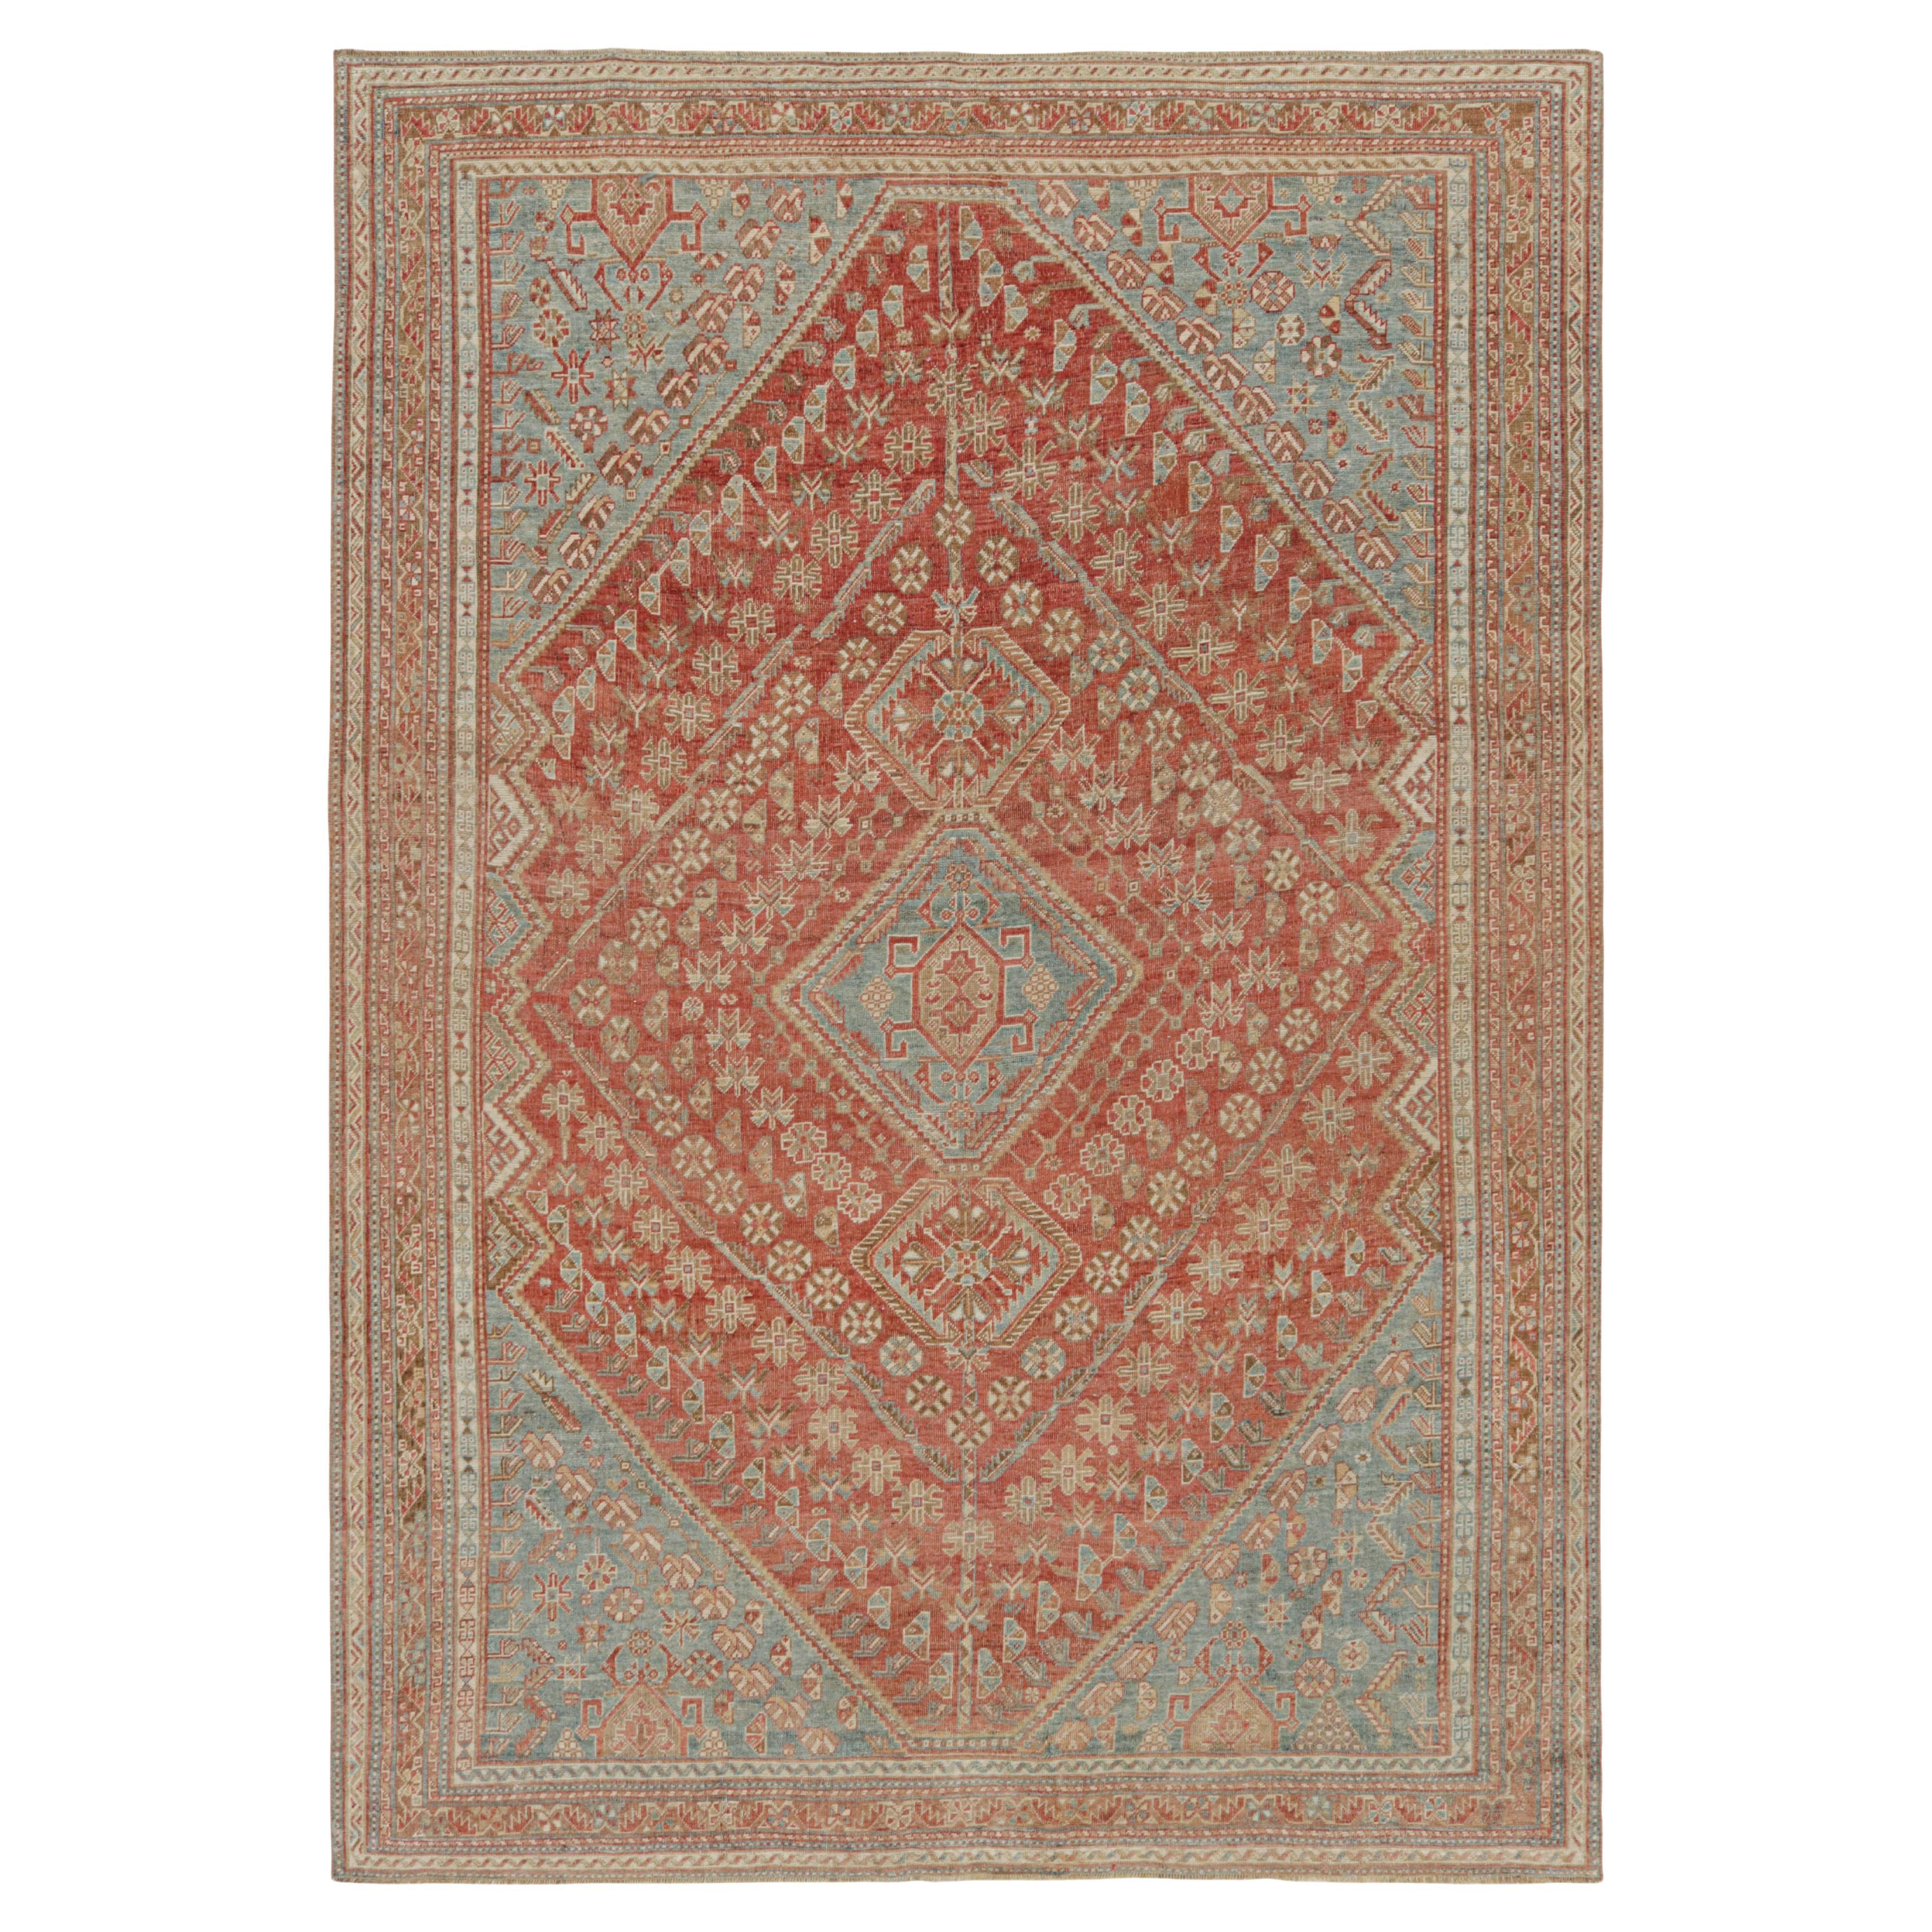 Vintage Ersari Rug in Red with Blue and Beige-Brown Patterns, from Rug & Kilim For Sale